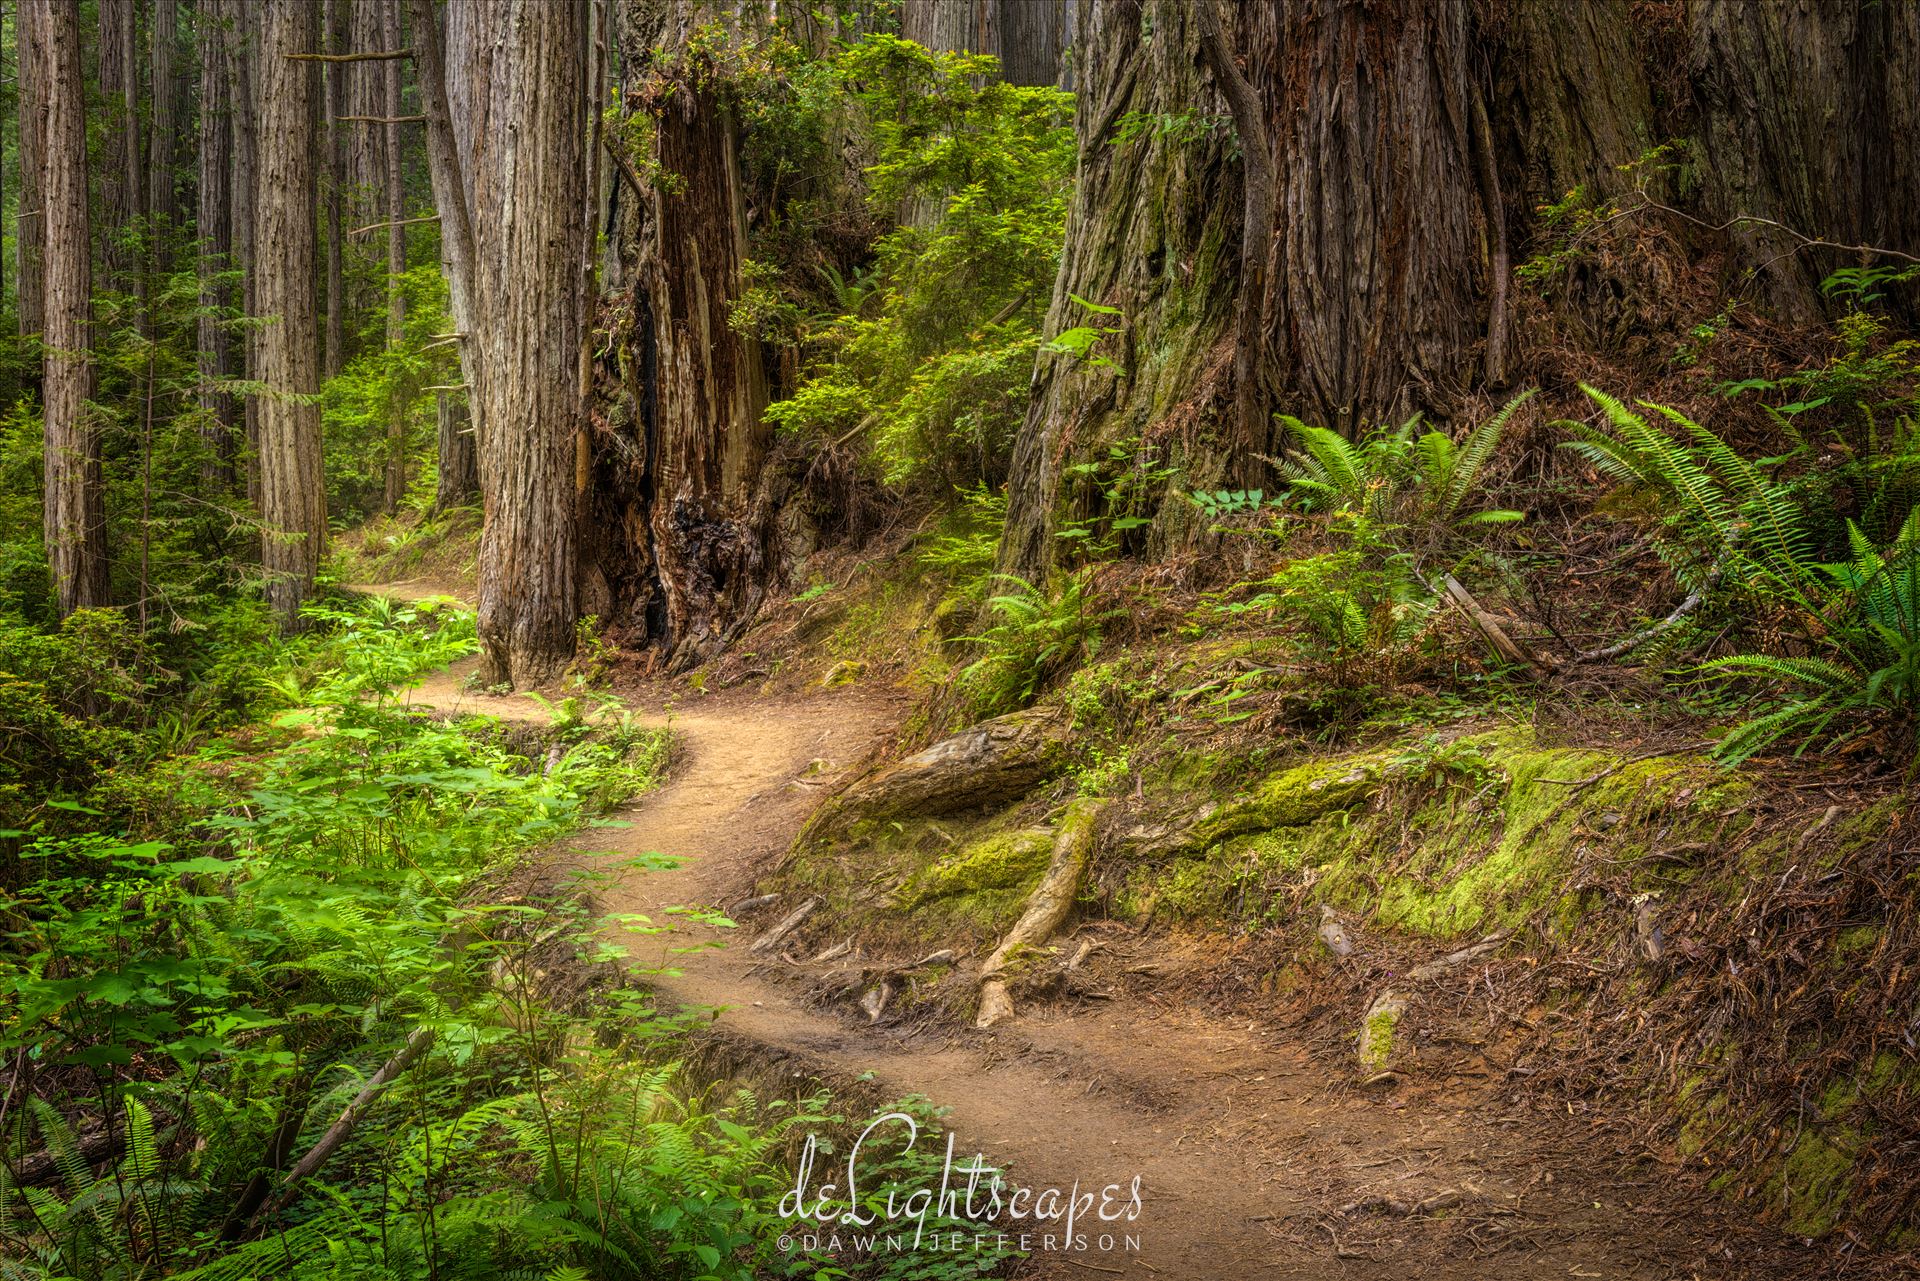 Redwood National Park - Giant ferns and goliath Redwood trees make Redwoods National Park a must visit place at least once in a lifetime. by Dawn Jefferson